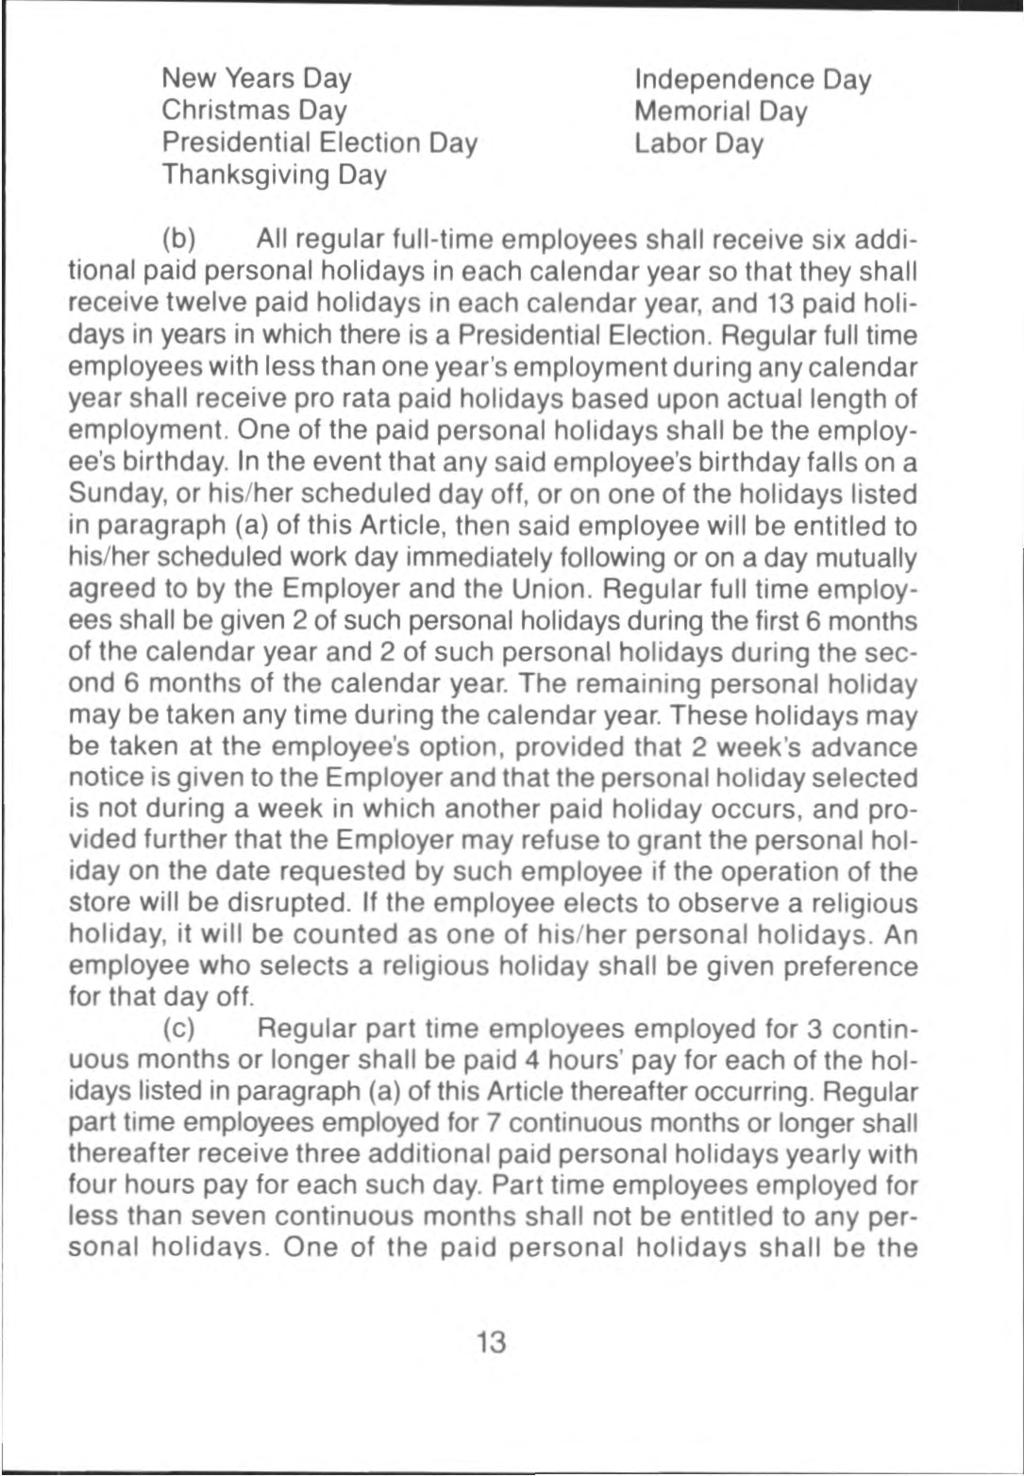 New Years Day Christmas Day Presidential Election Day Thanksgiving Day Independence Day Memorial Day Labor Day (b) All regular full-time employees shall receive six additional paid personal holidays